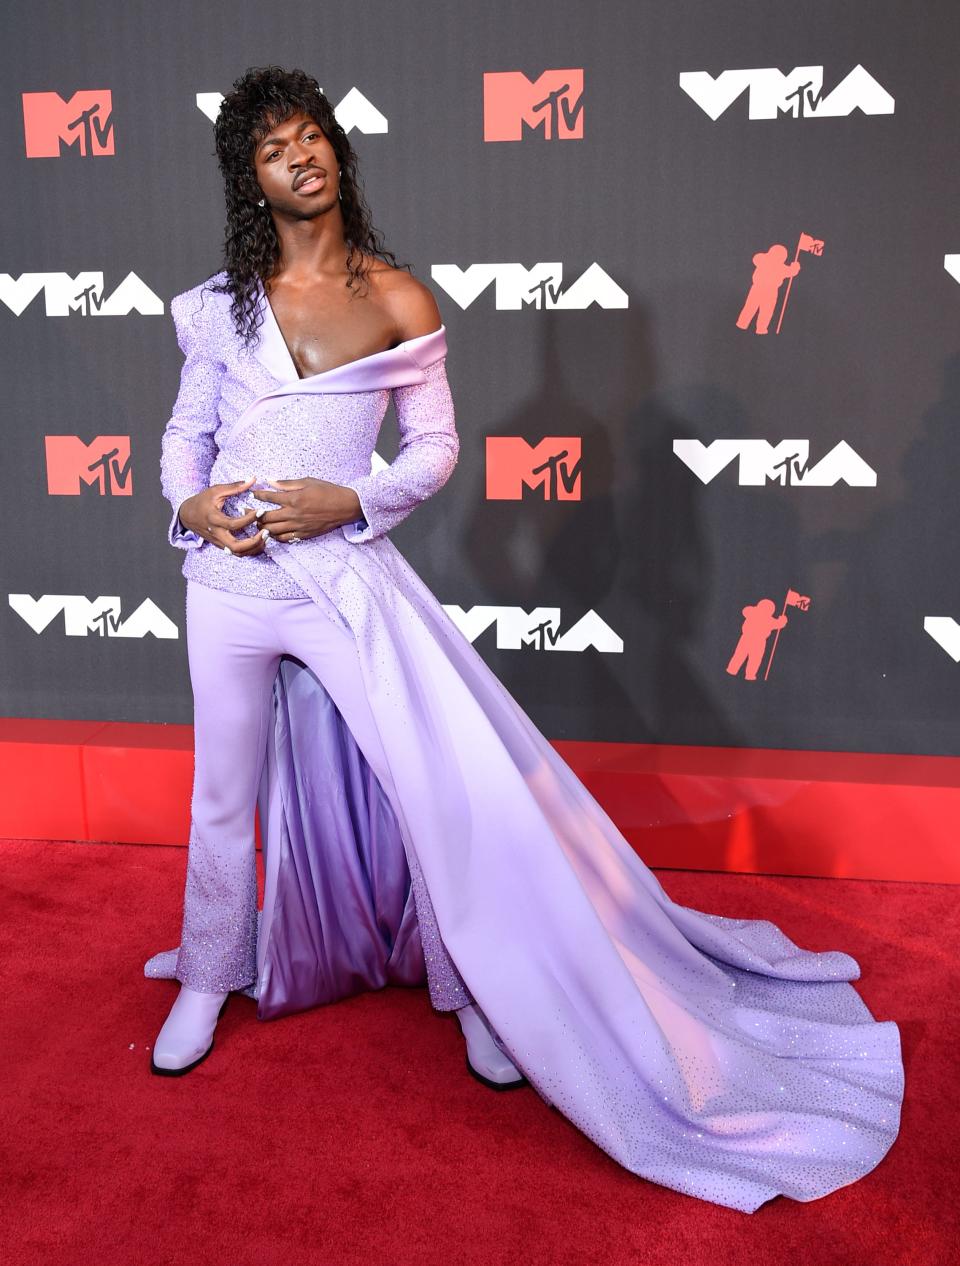 Lil Nas X on the red carpet at the Video Music Awards 2021.